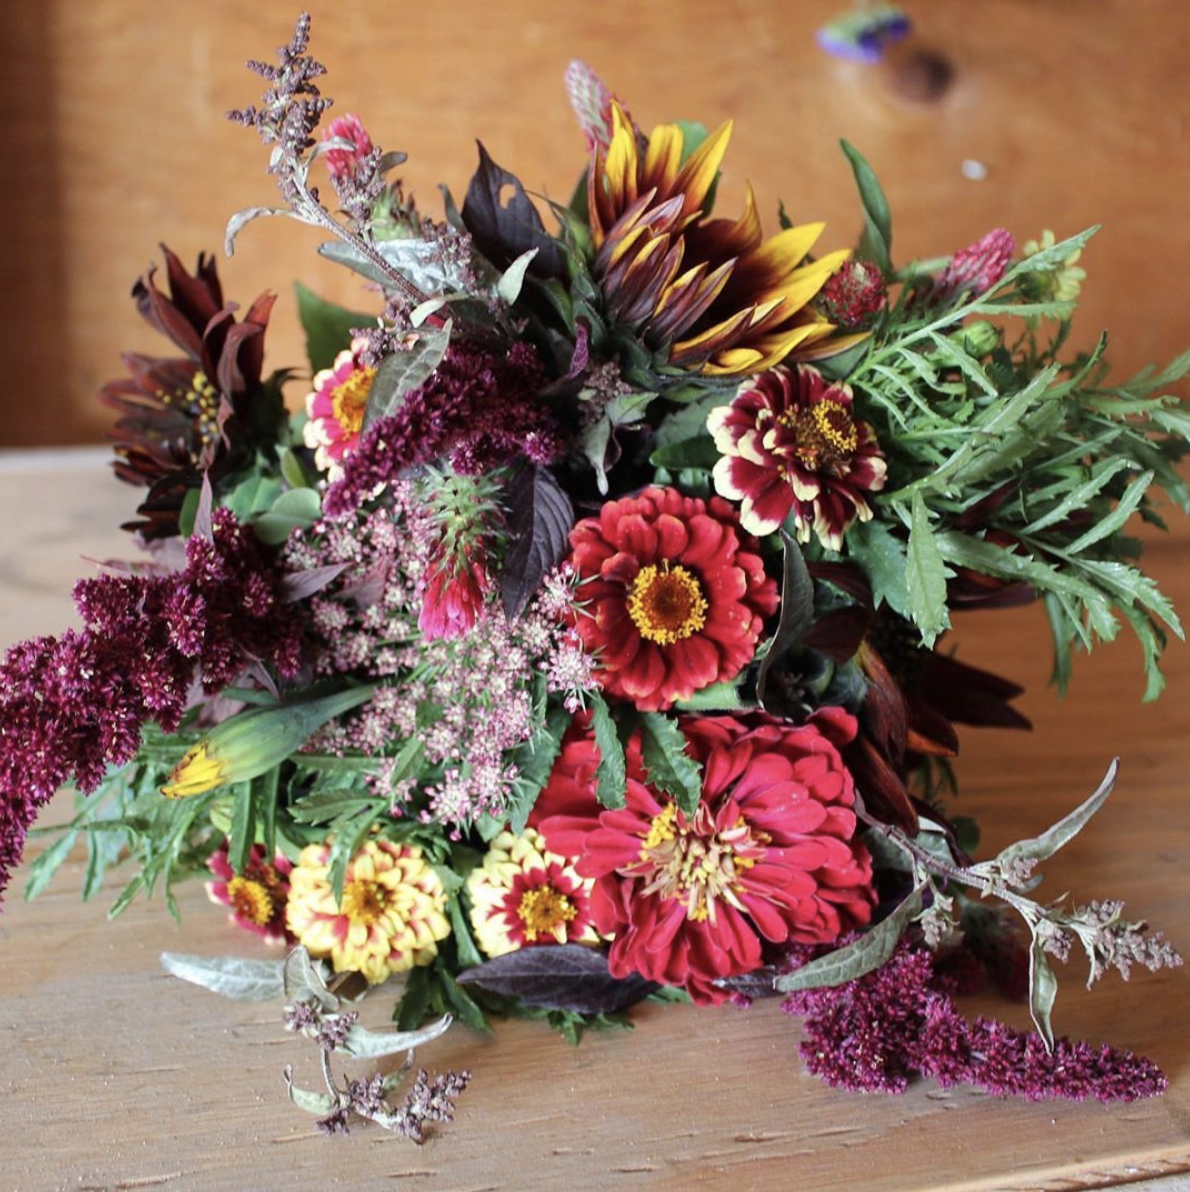 A late summer bouquet, part of Alberta Girl Acre's Late Summer Bouquet subscriptions